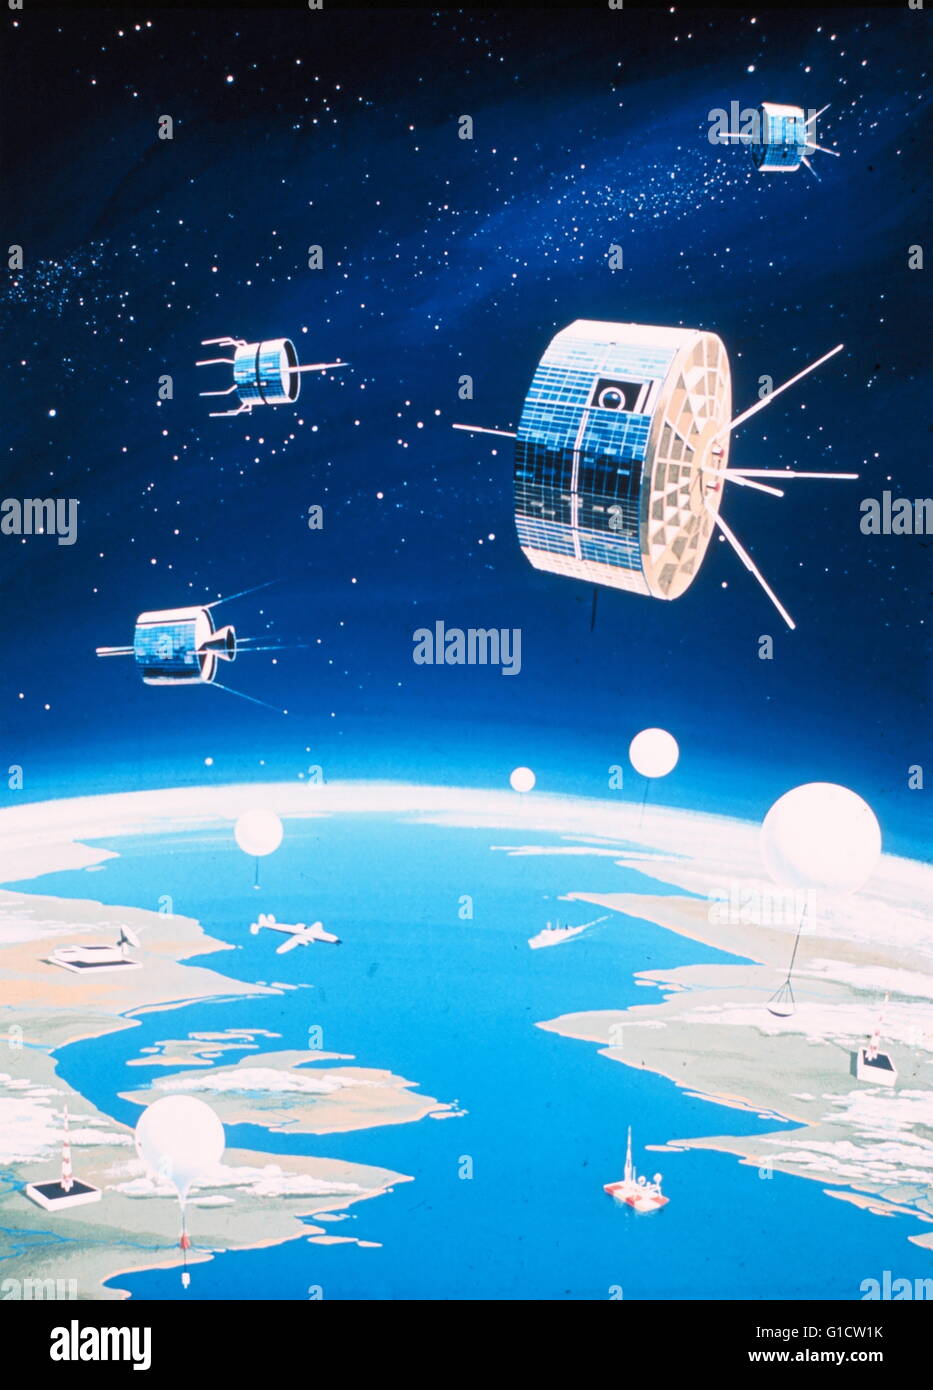 An artist's conception of a fully integrated environmental monitoring system including satellites, balloons, ships, aircraft, buoys, and data reception and processing facilities. Stock Photo